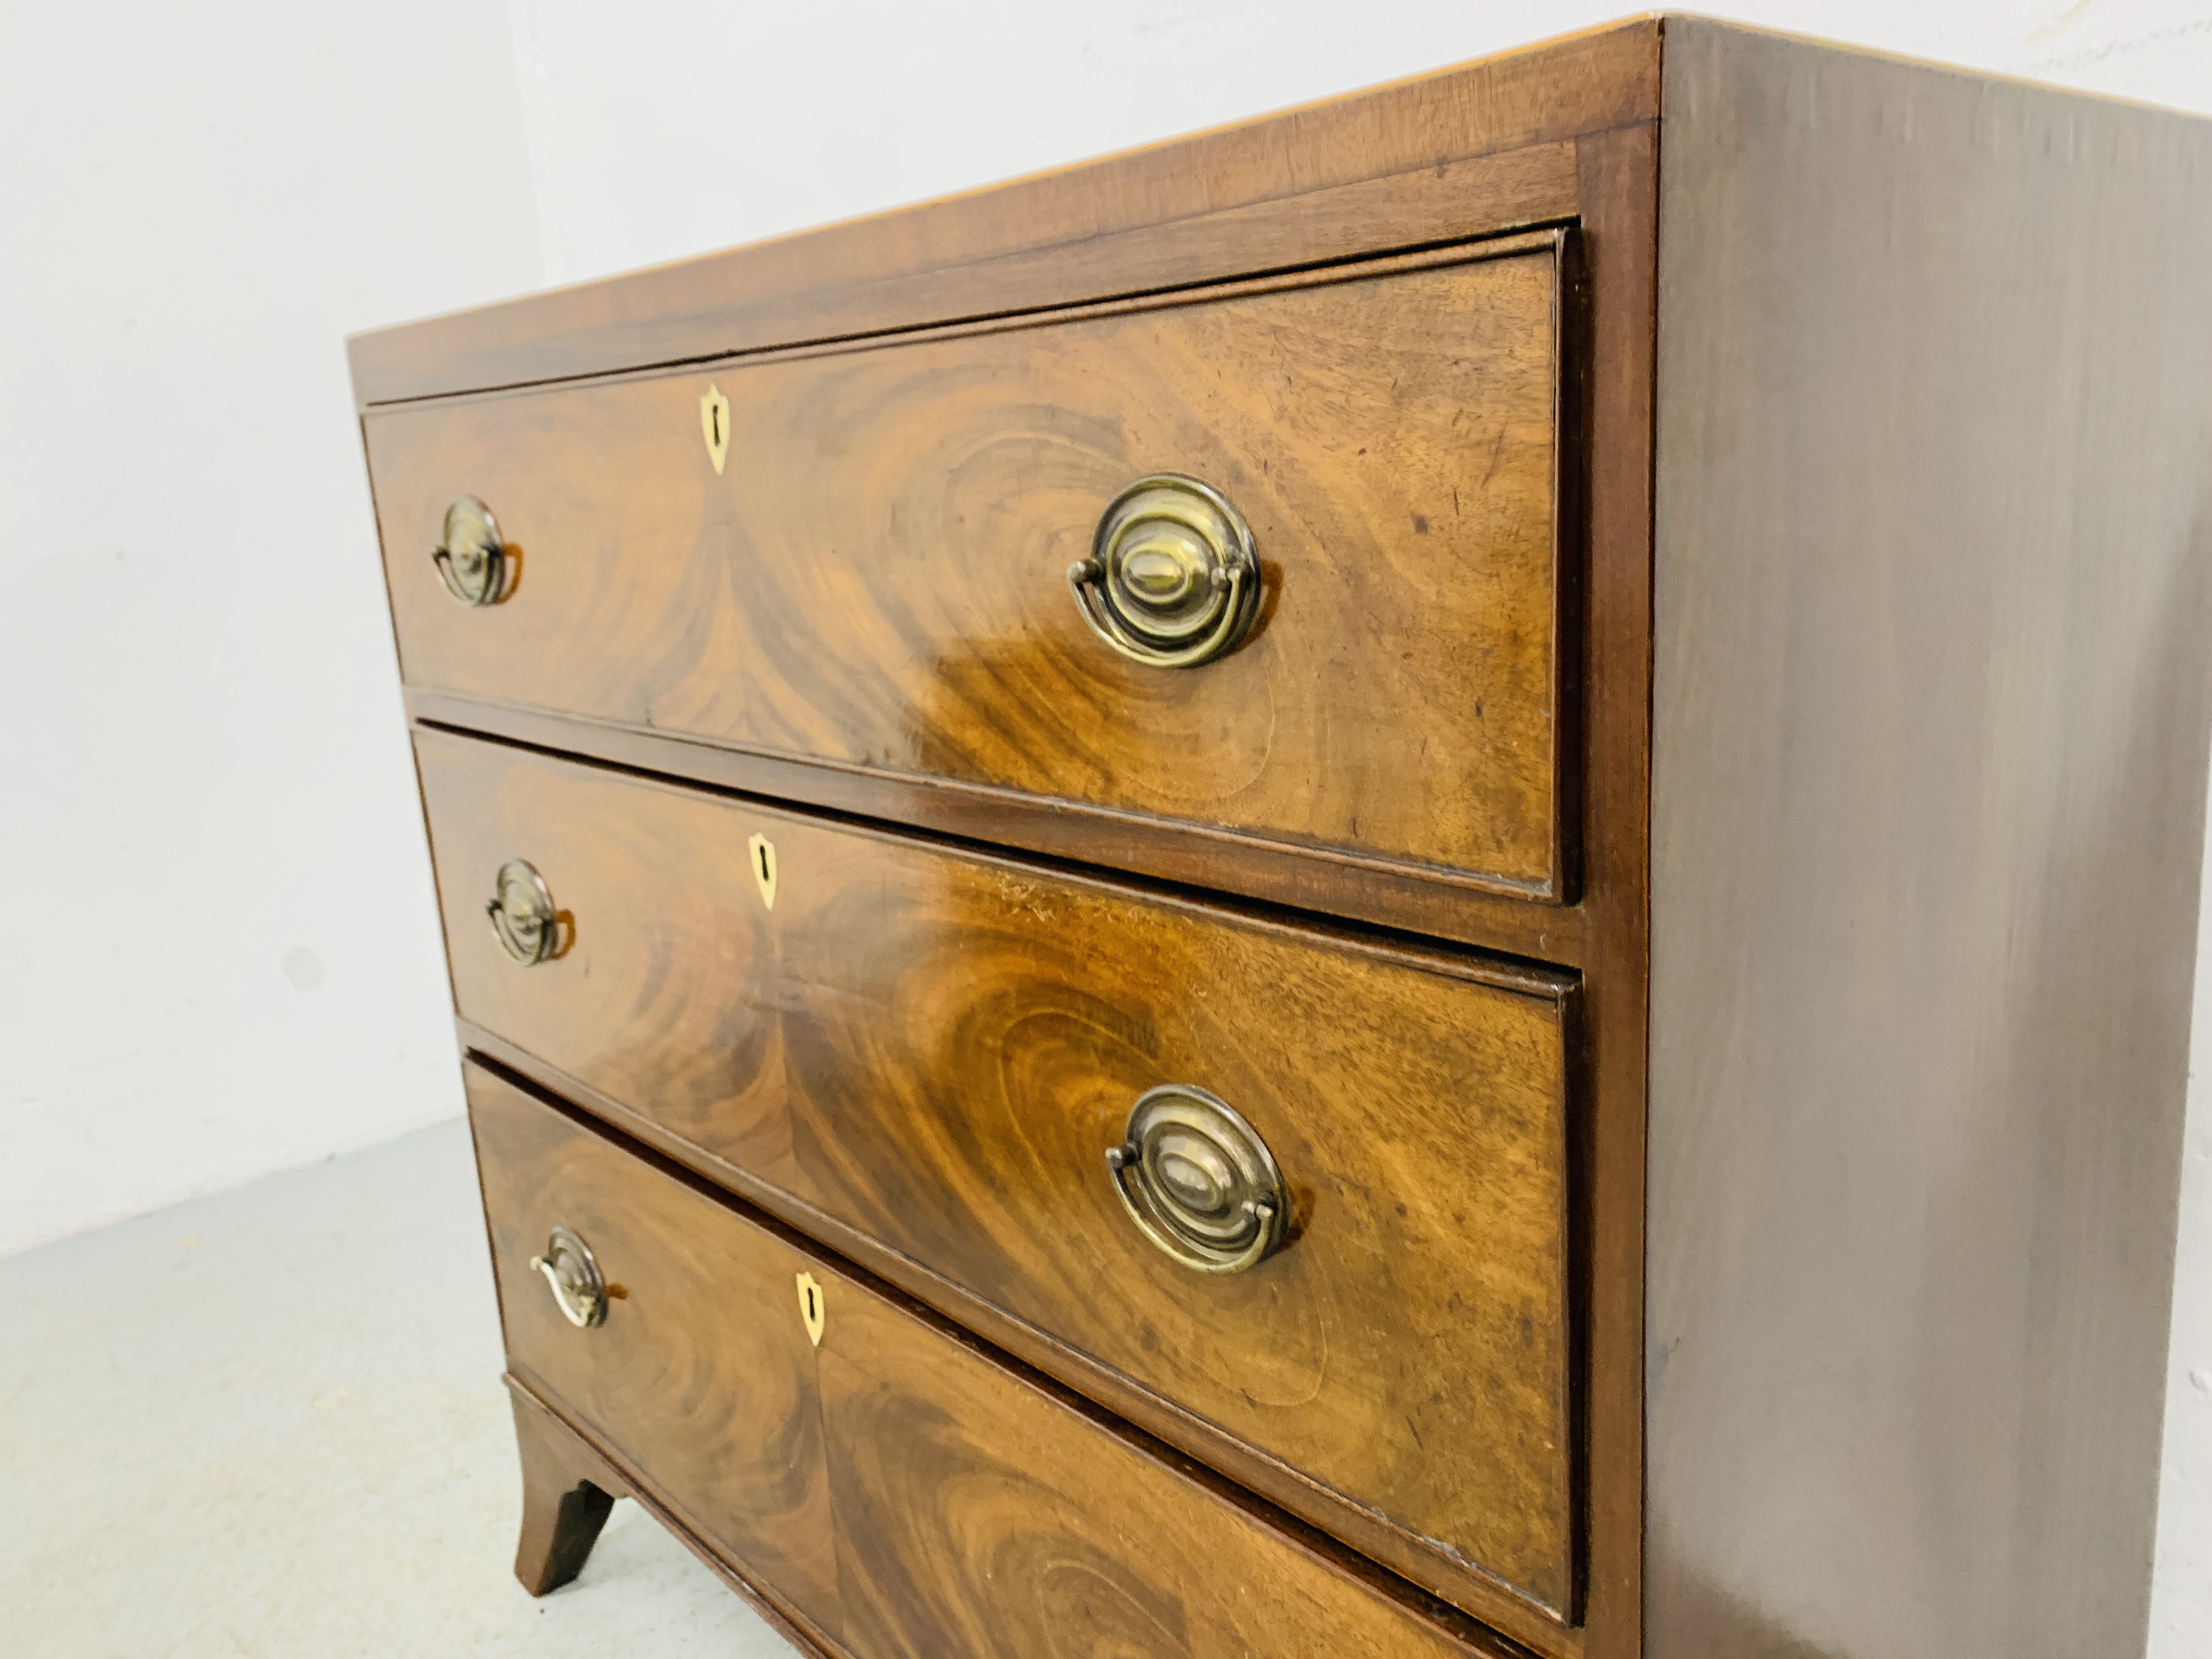 AN EARLY C19TH VINTAGE FLAME MAHOGANY 3 DRAWER CHEST, OVAL BRASS HANDLES ON SPLAYED LEGS - W 89CM. - Image 7 of 10